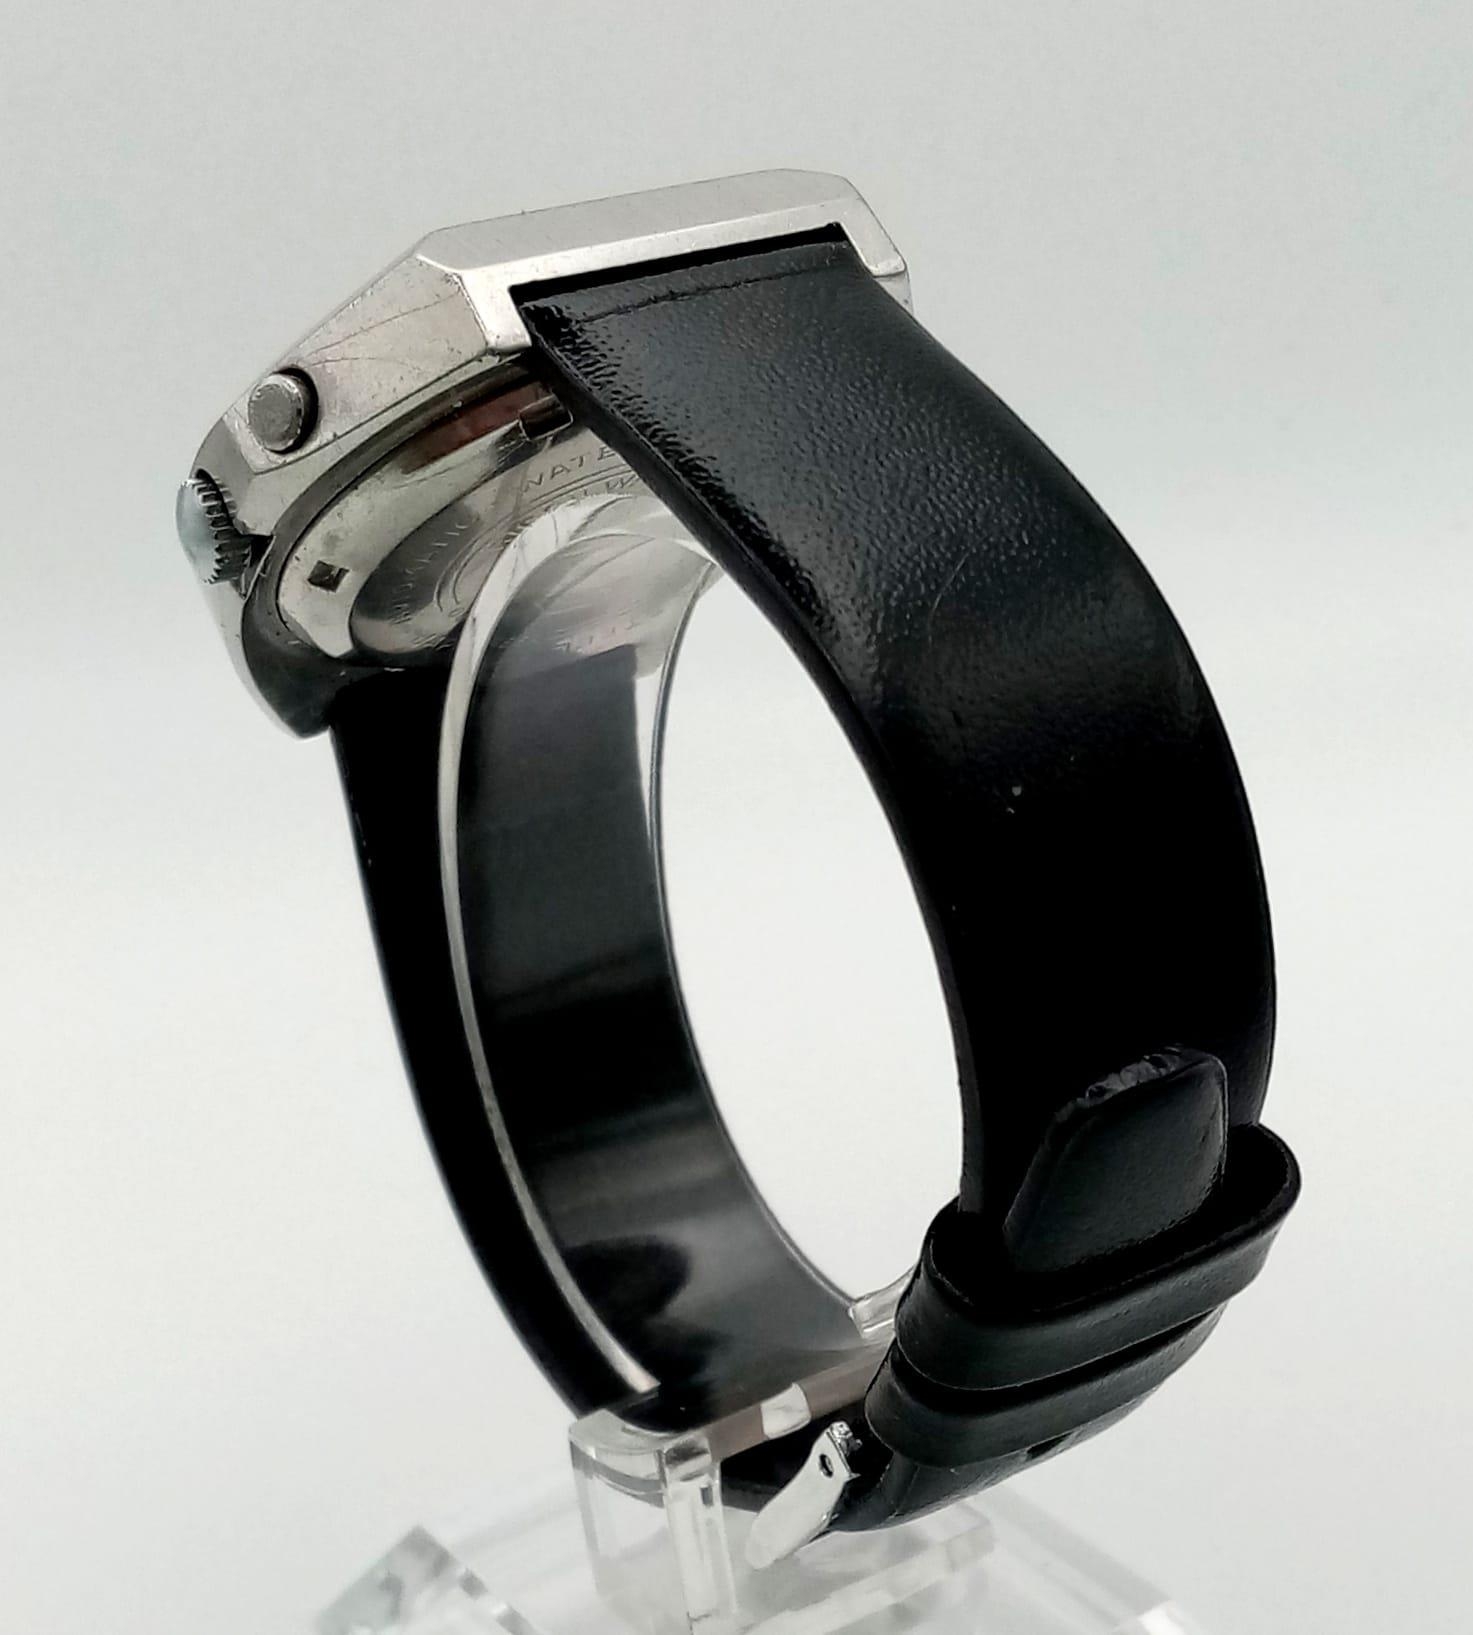 A Handsome Vintage Ricoh Automatic Gents Watch. Black leather strap. Stainless steel case -38mm. - Image 3 of 4